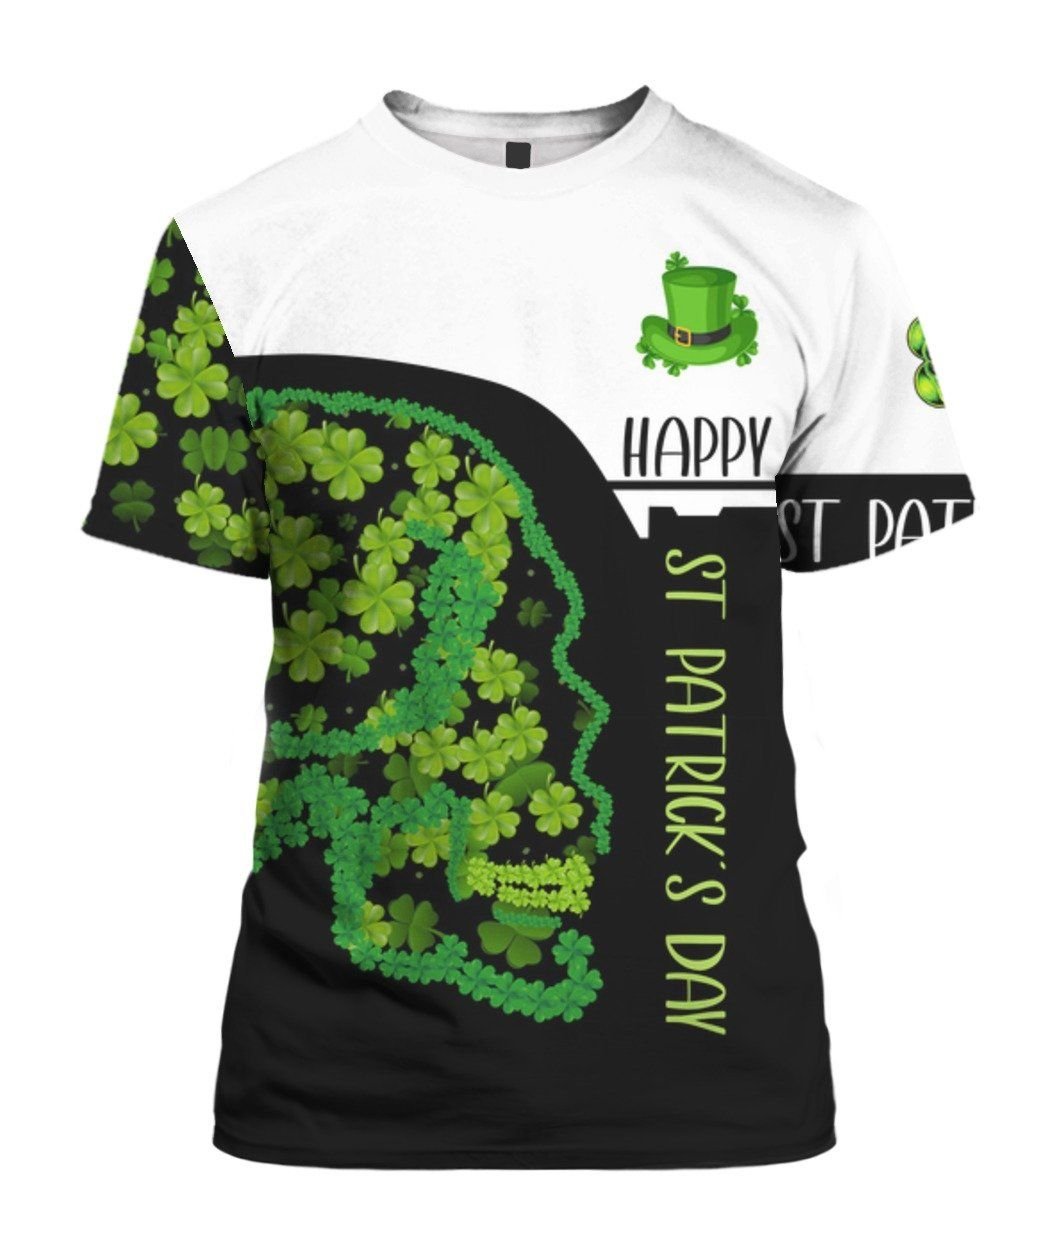 Happy St Patrick’s Day 3D All Over Print | Hoodie | T-Shirt | Sweatshirt Style: 3D T-Shirt, Color: Black